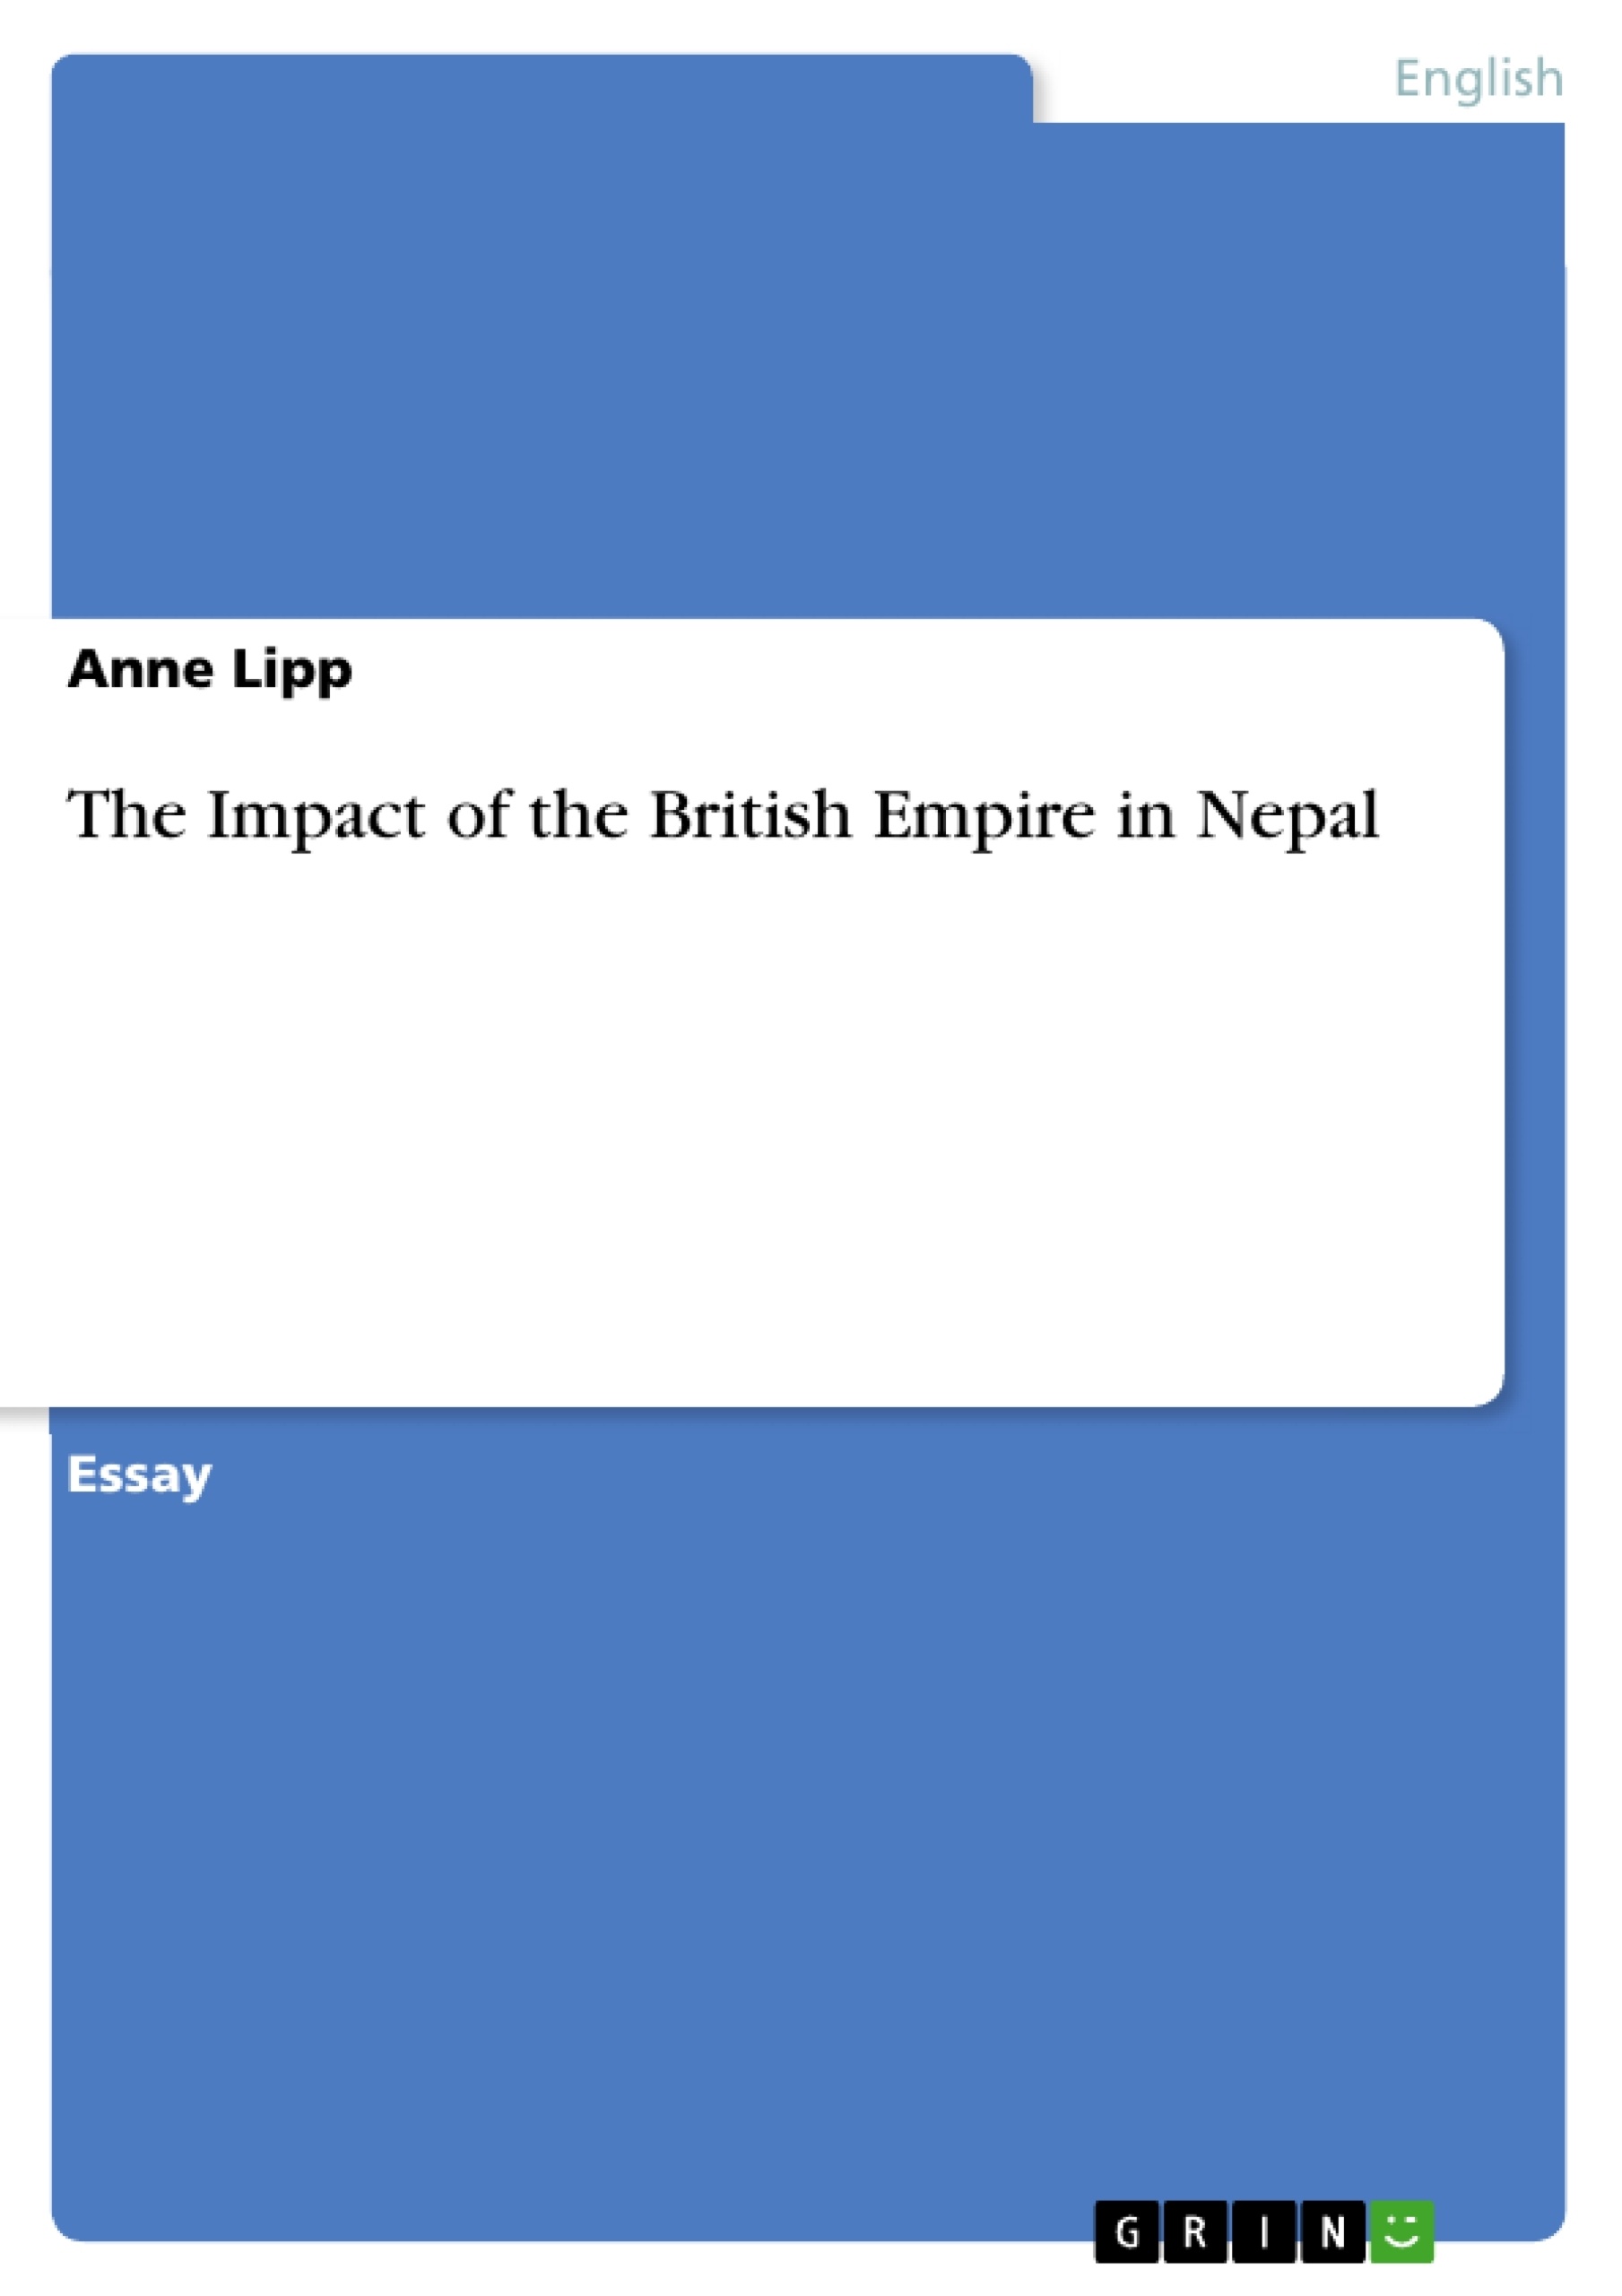 Título: The Impact of the British Empire in Nepal